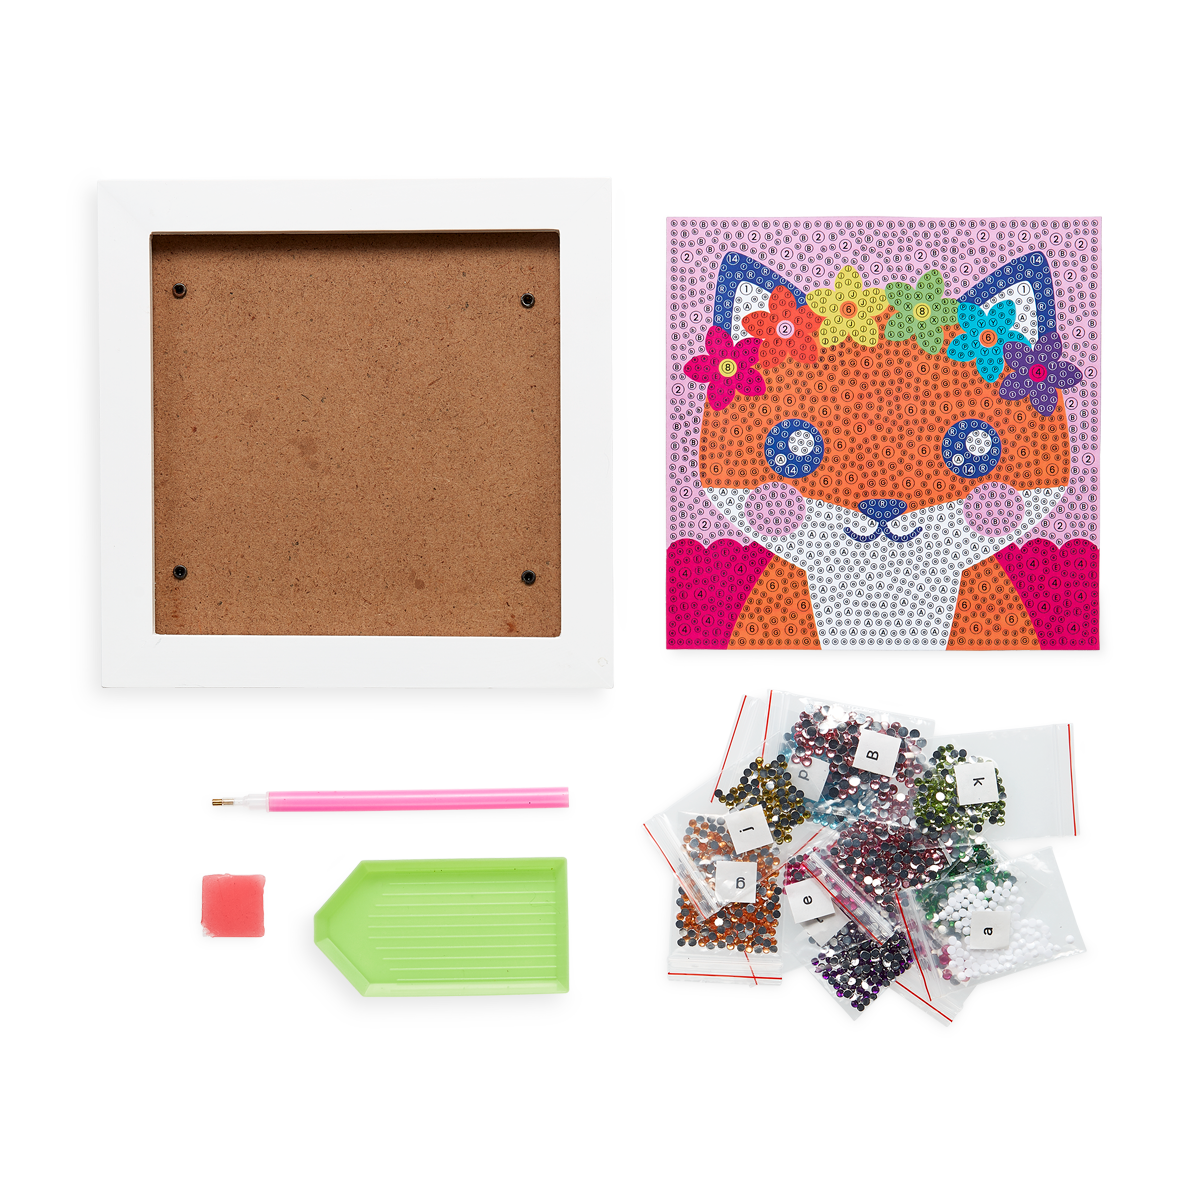 OOLY Razzle Dazzle DIY Gem Art Kit - Friendly Fox out of package showing all items included: white frame, design card, gems and accessory tools.